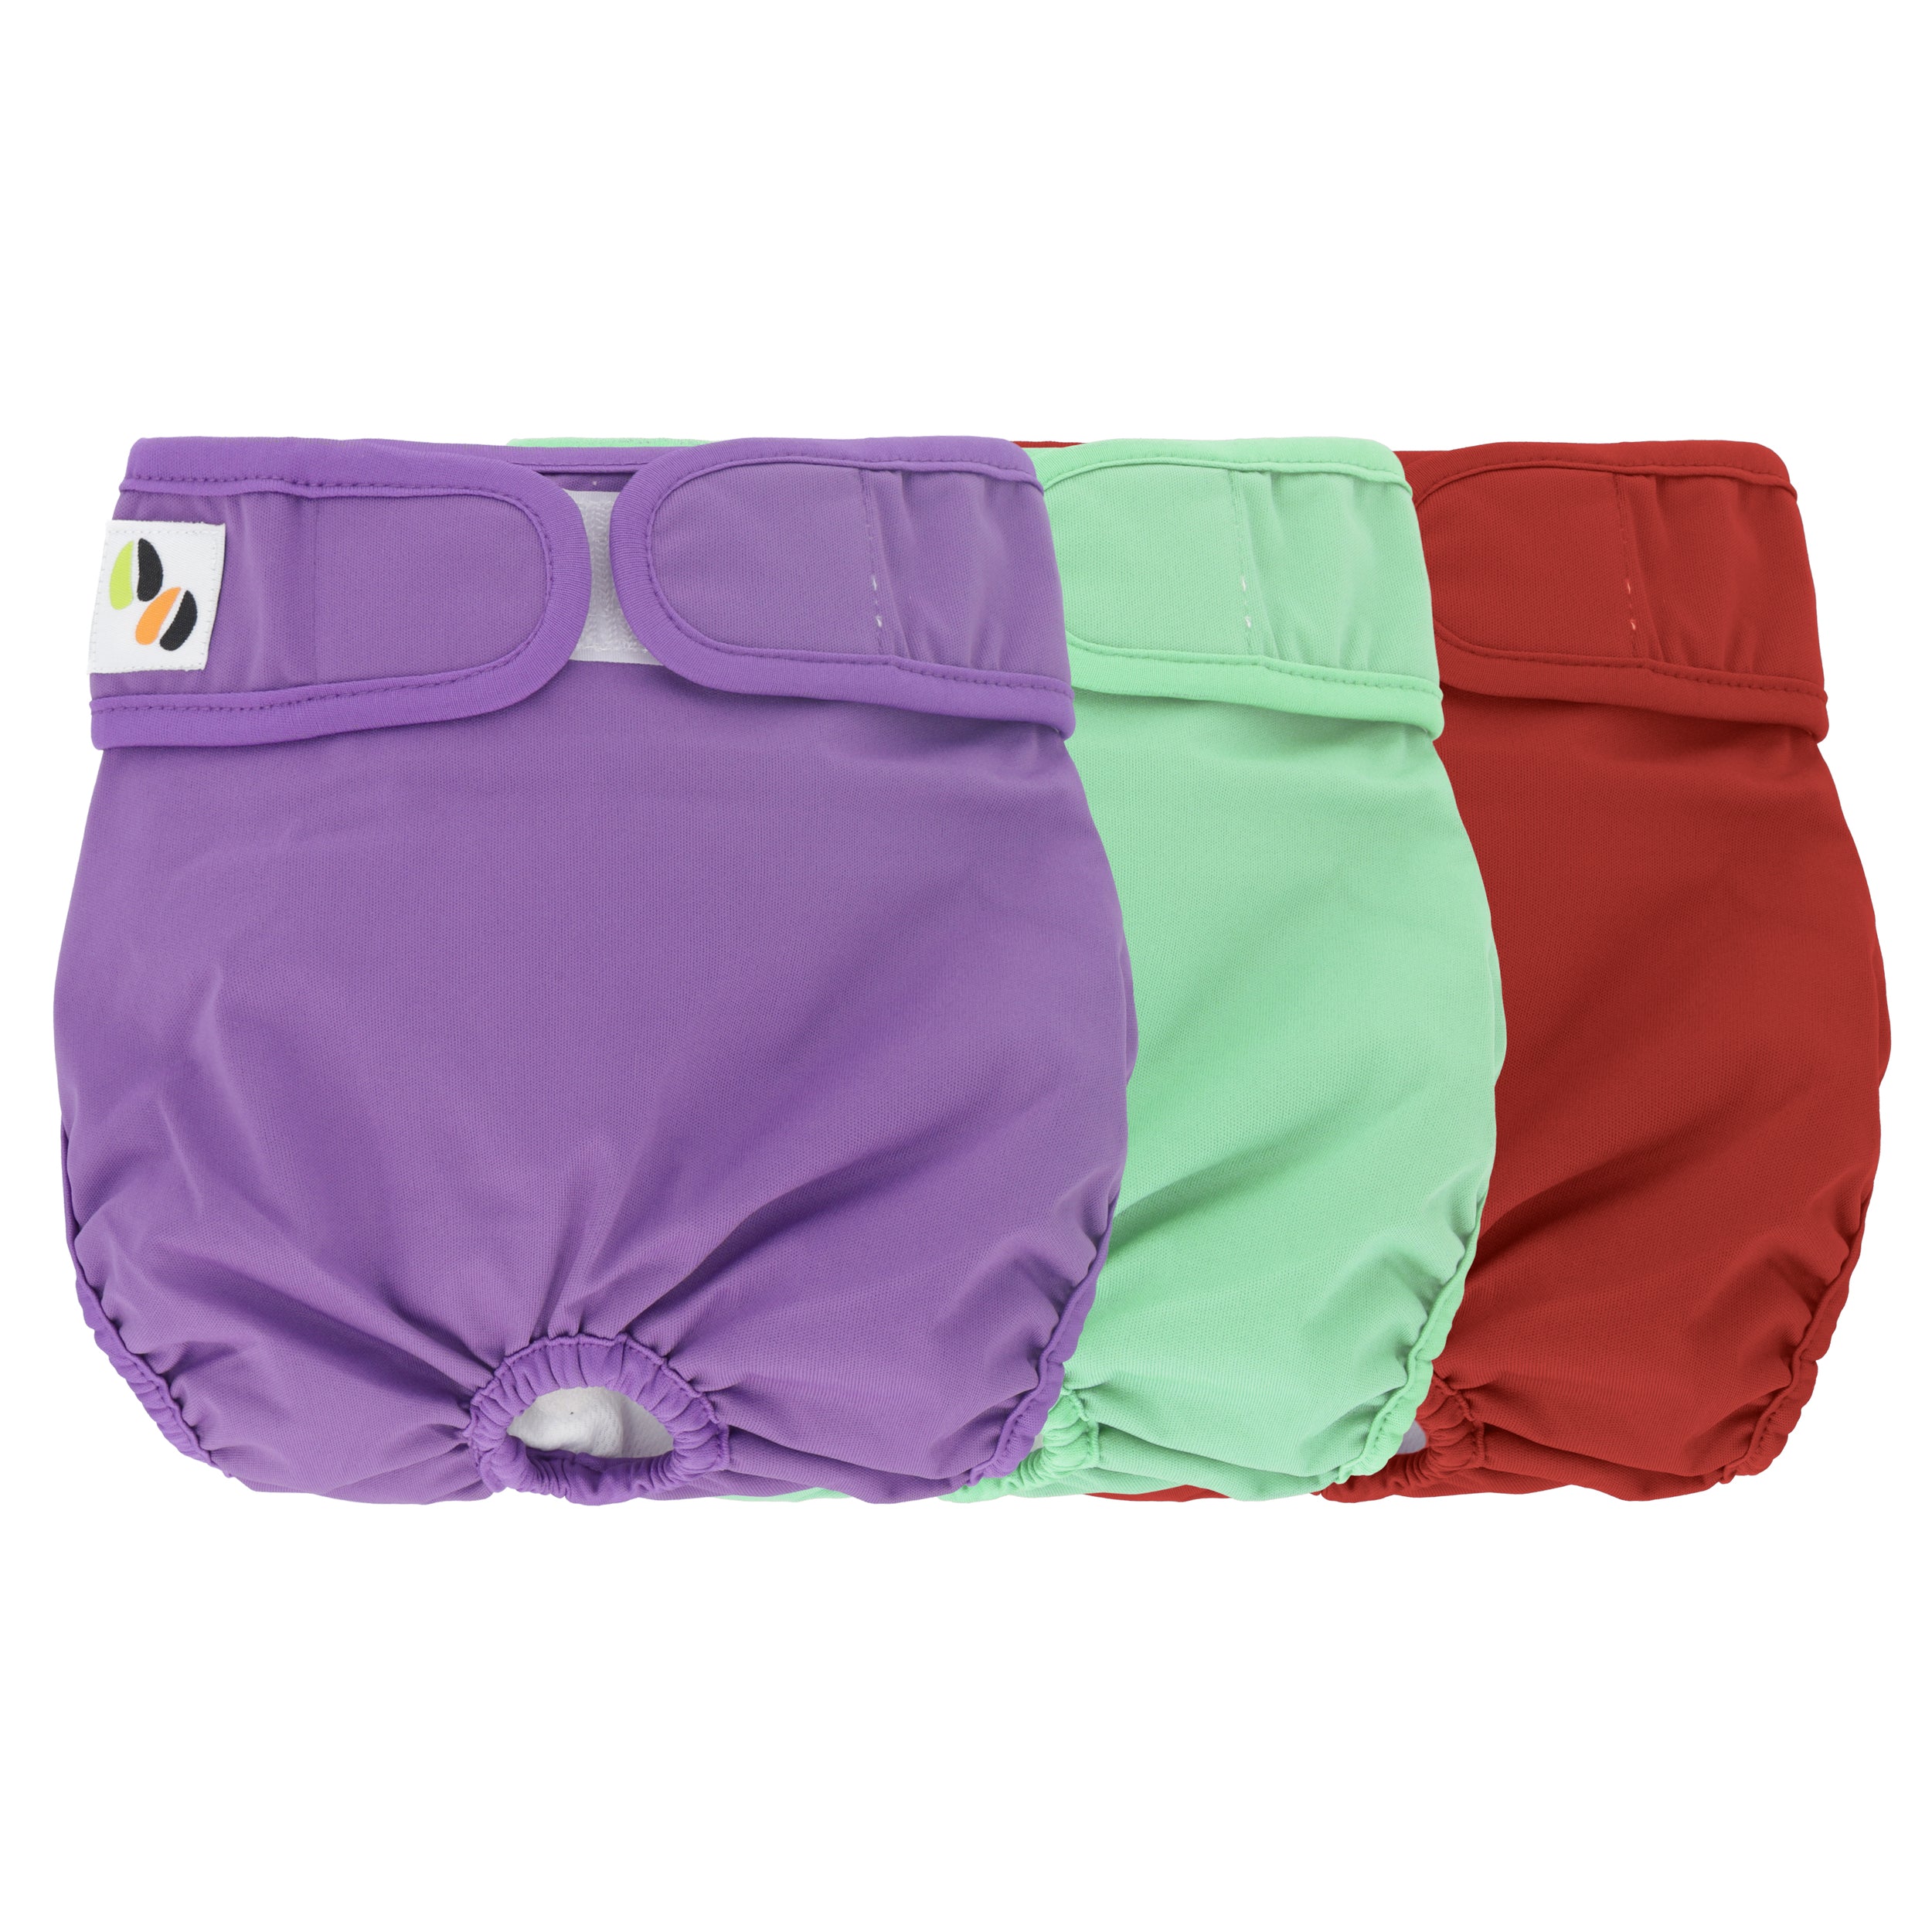 Dog Diapers - Jumpy Moo's - Pet Supplies